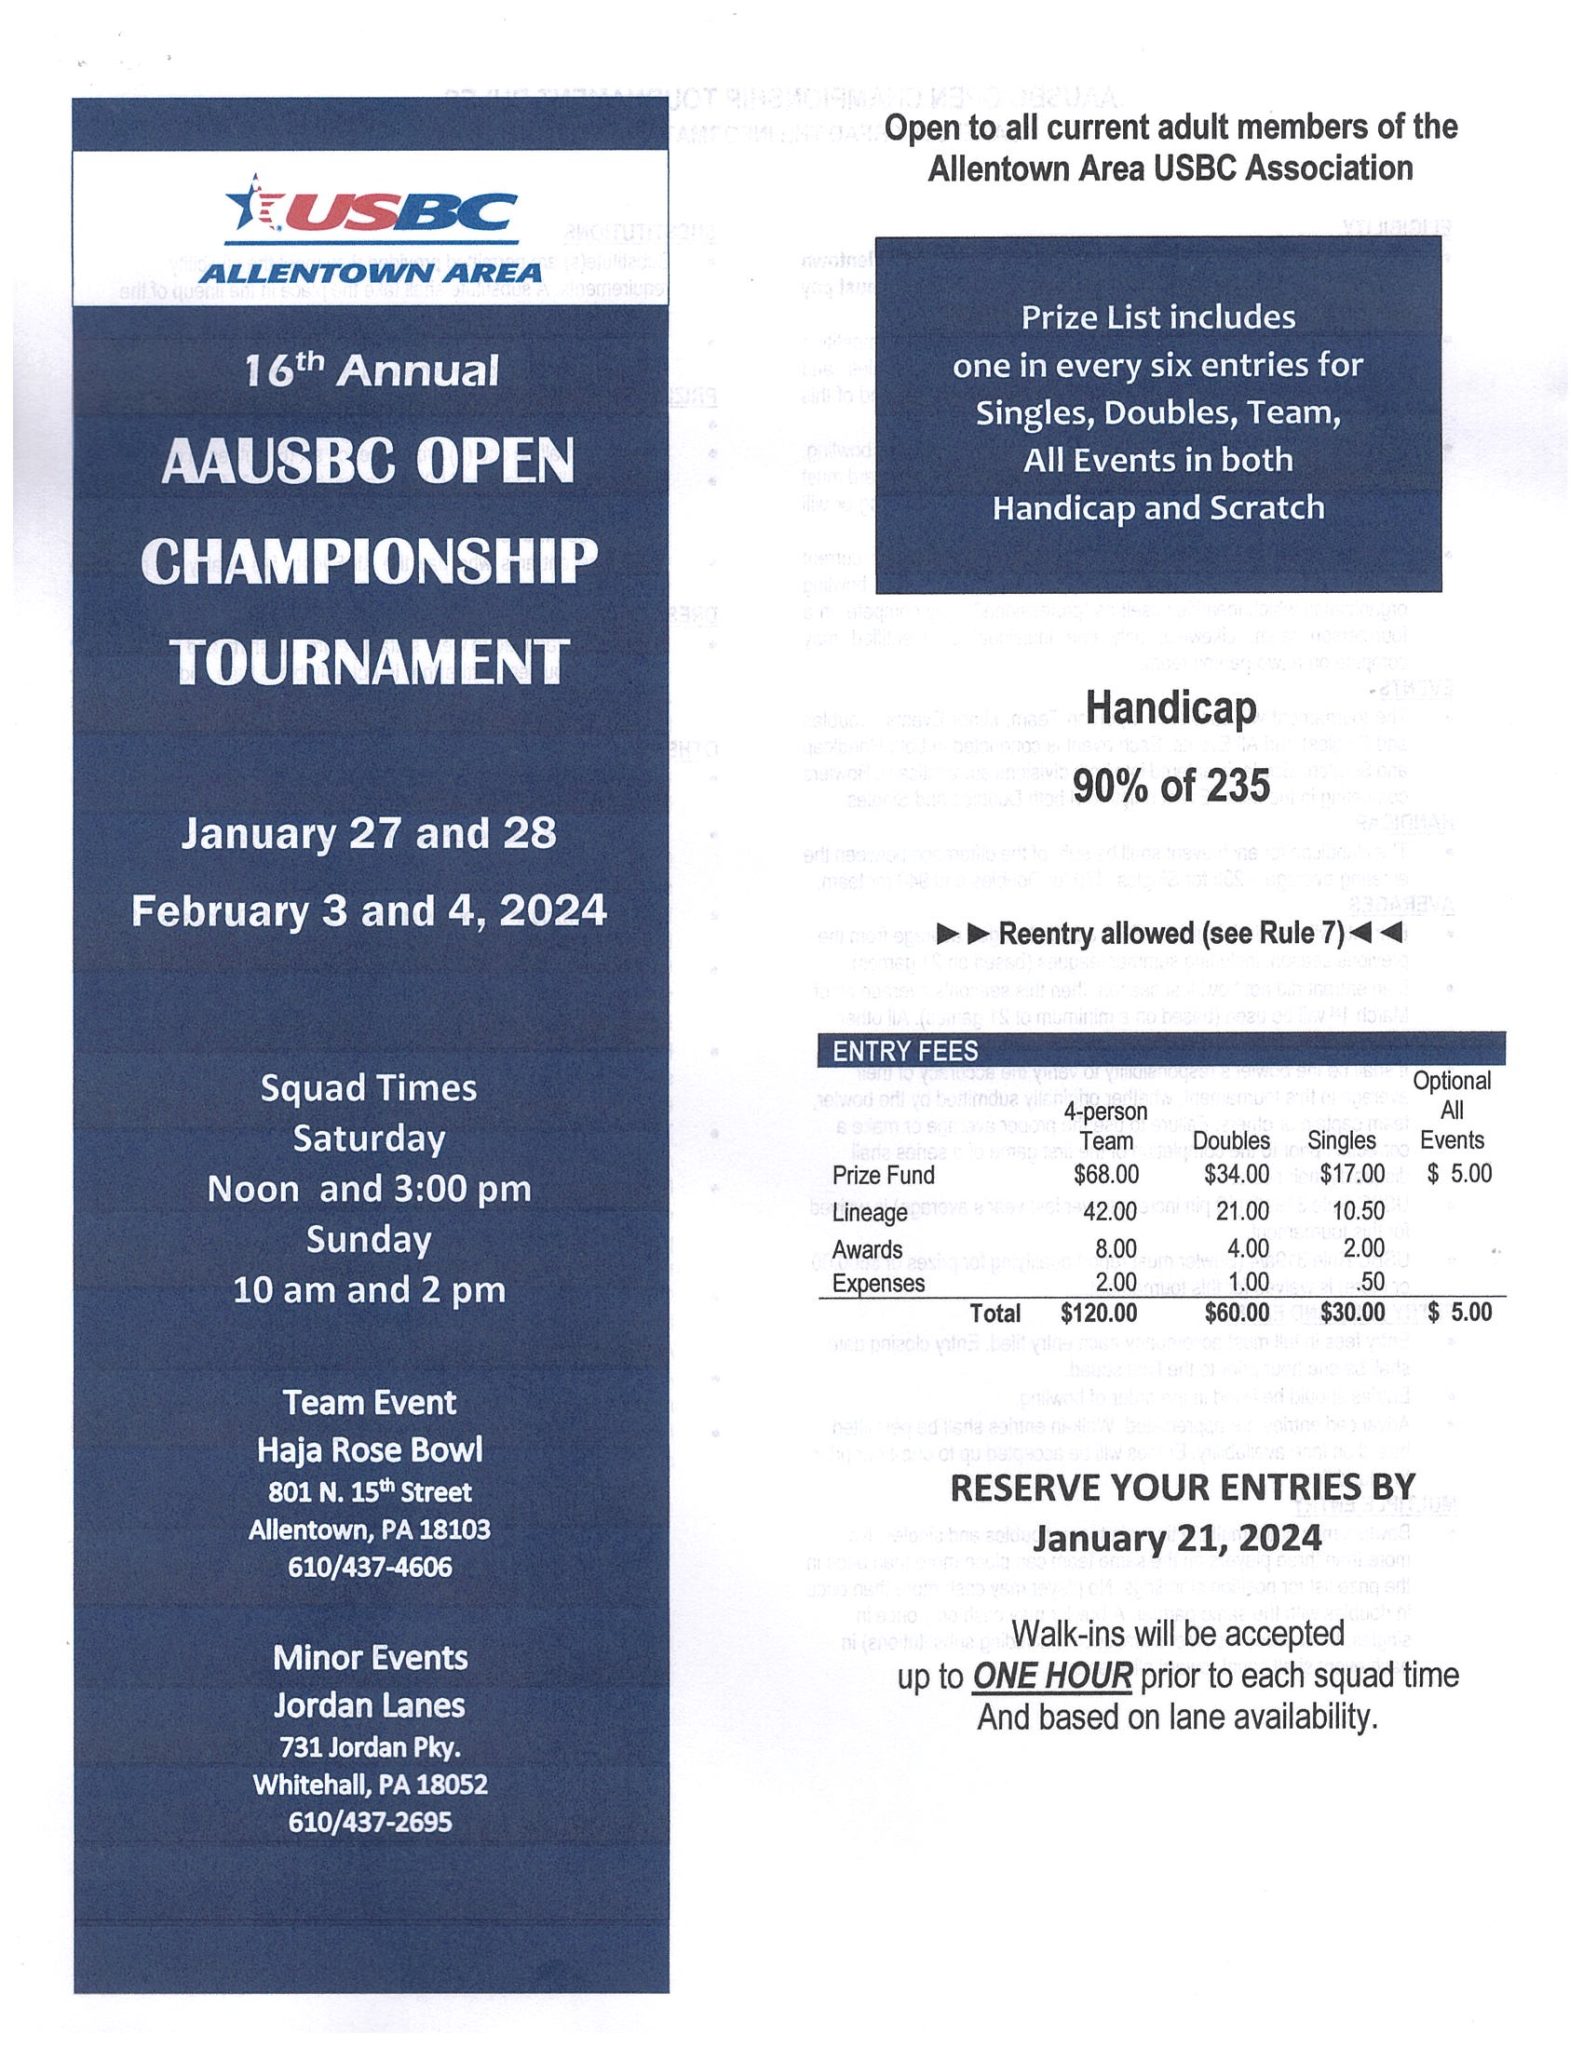 16th Annual AAUSBC Open Championship Tournament 3